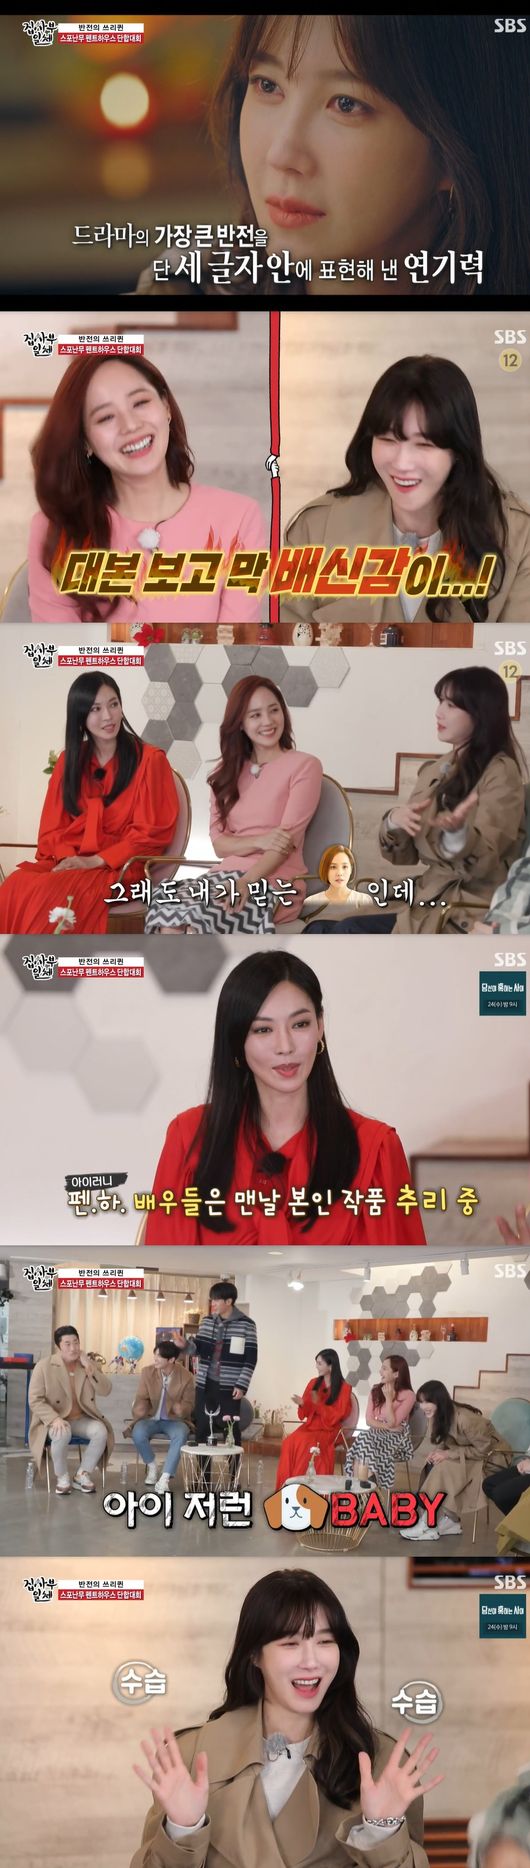 In All The Butlers, Lee Ji-ah mentioned Eugenes betrayal in the drama, and Kim So-yeon caught the eye by telling the story about the Piano scene.SBS entertainment All The Butlers Penthouse Three Queen, Actor Lee Ji-ah, Kim So-yeon and Eugene appeared on the 21st.On this day, Actor Lee Ji-ah, Kim So-yeon, and Eugene appeared in the Penthouse feature, and mentioned the Piano scene of Kim So-yeon, which became a hot topic.Kim So-yeon said, I practiced for my work, I originally hit the early chopstick march. I learned from my big sister in a video call, I can not see the score shamefully, I memorized the score unconditionally through the score. It was a surprising exercise.Lee Ji-ah also gave a senior shot to the scene of the shooting.Lee Ji-ah said, I did not really know that Oh Yoon-hee (Eugene) was a villain, I was scripted when I was cheating with Dan Tae-jung. Eugene is a person I believe, but I do not know how to do this, I was just surprised to see the script, and I was really surprised.The three people said, Actors are almost wrong to reason, and they are all wrong, and they are unexpected.All The Butlers members asked, Is it surprising to see the season 2 script?Lee Ji-ah replied without knowing himself, Yes, and was surprised.The bait members asked, Is not it season 2 cardiology? Lee Ji-ah said, Do you want to refresh the Sport Club?I laughed with a cool but hairy personality.When asked to take a fishing trailer, the three people exploded the reaction and asked if they were practicing in season 2,  (Sport Club do Recipe) is not ~ ~ and fell into the drama Sport Club do Recipe play.All The Butlers broadcast screen capture